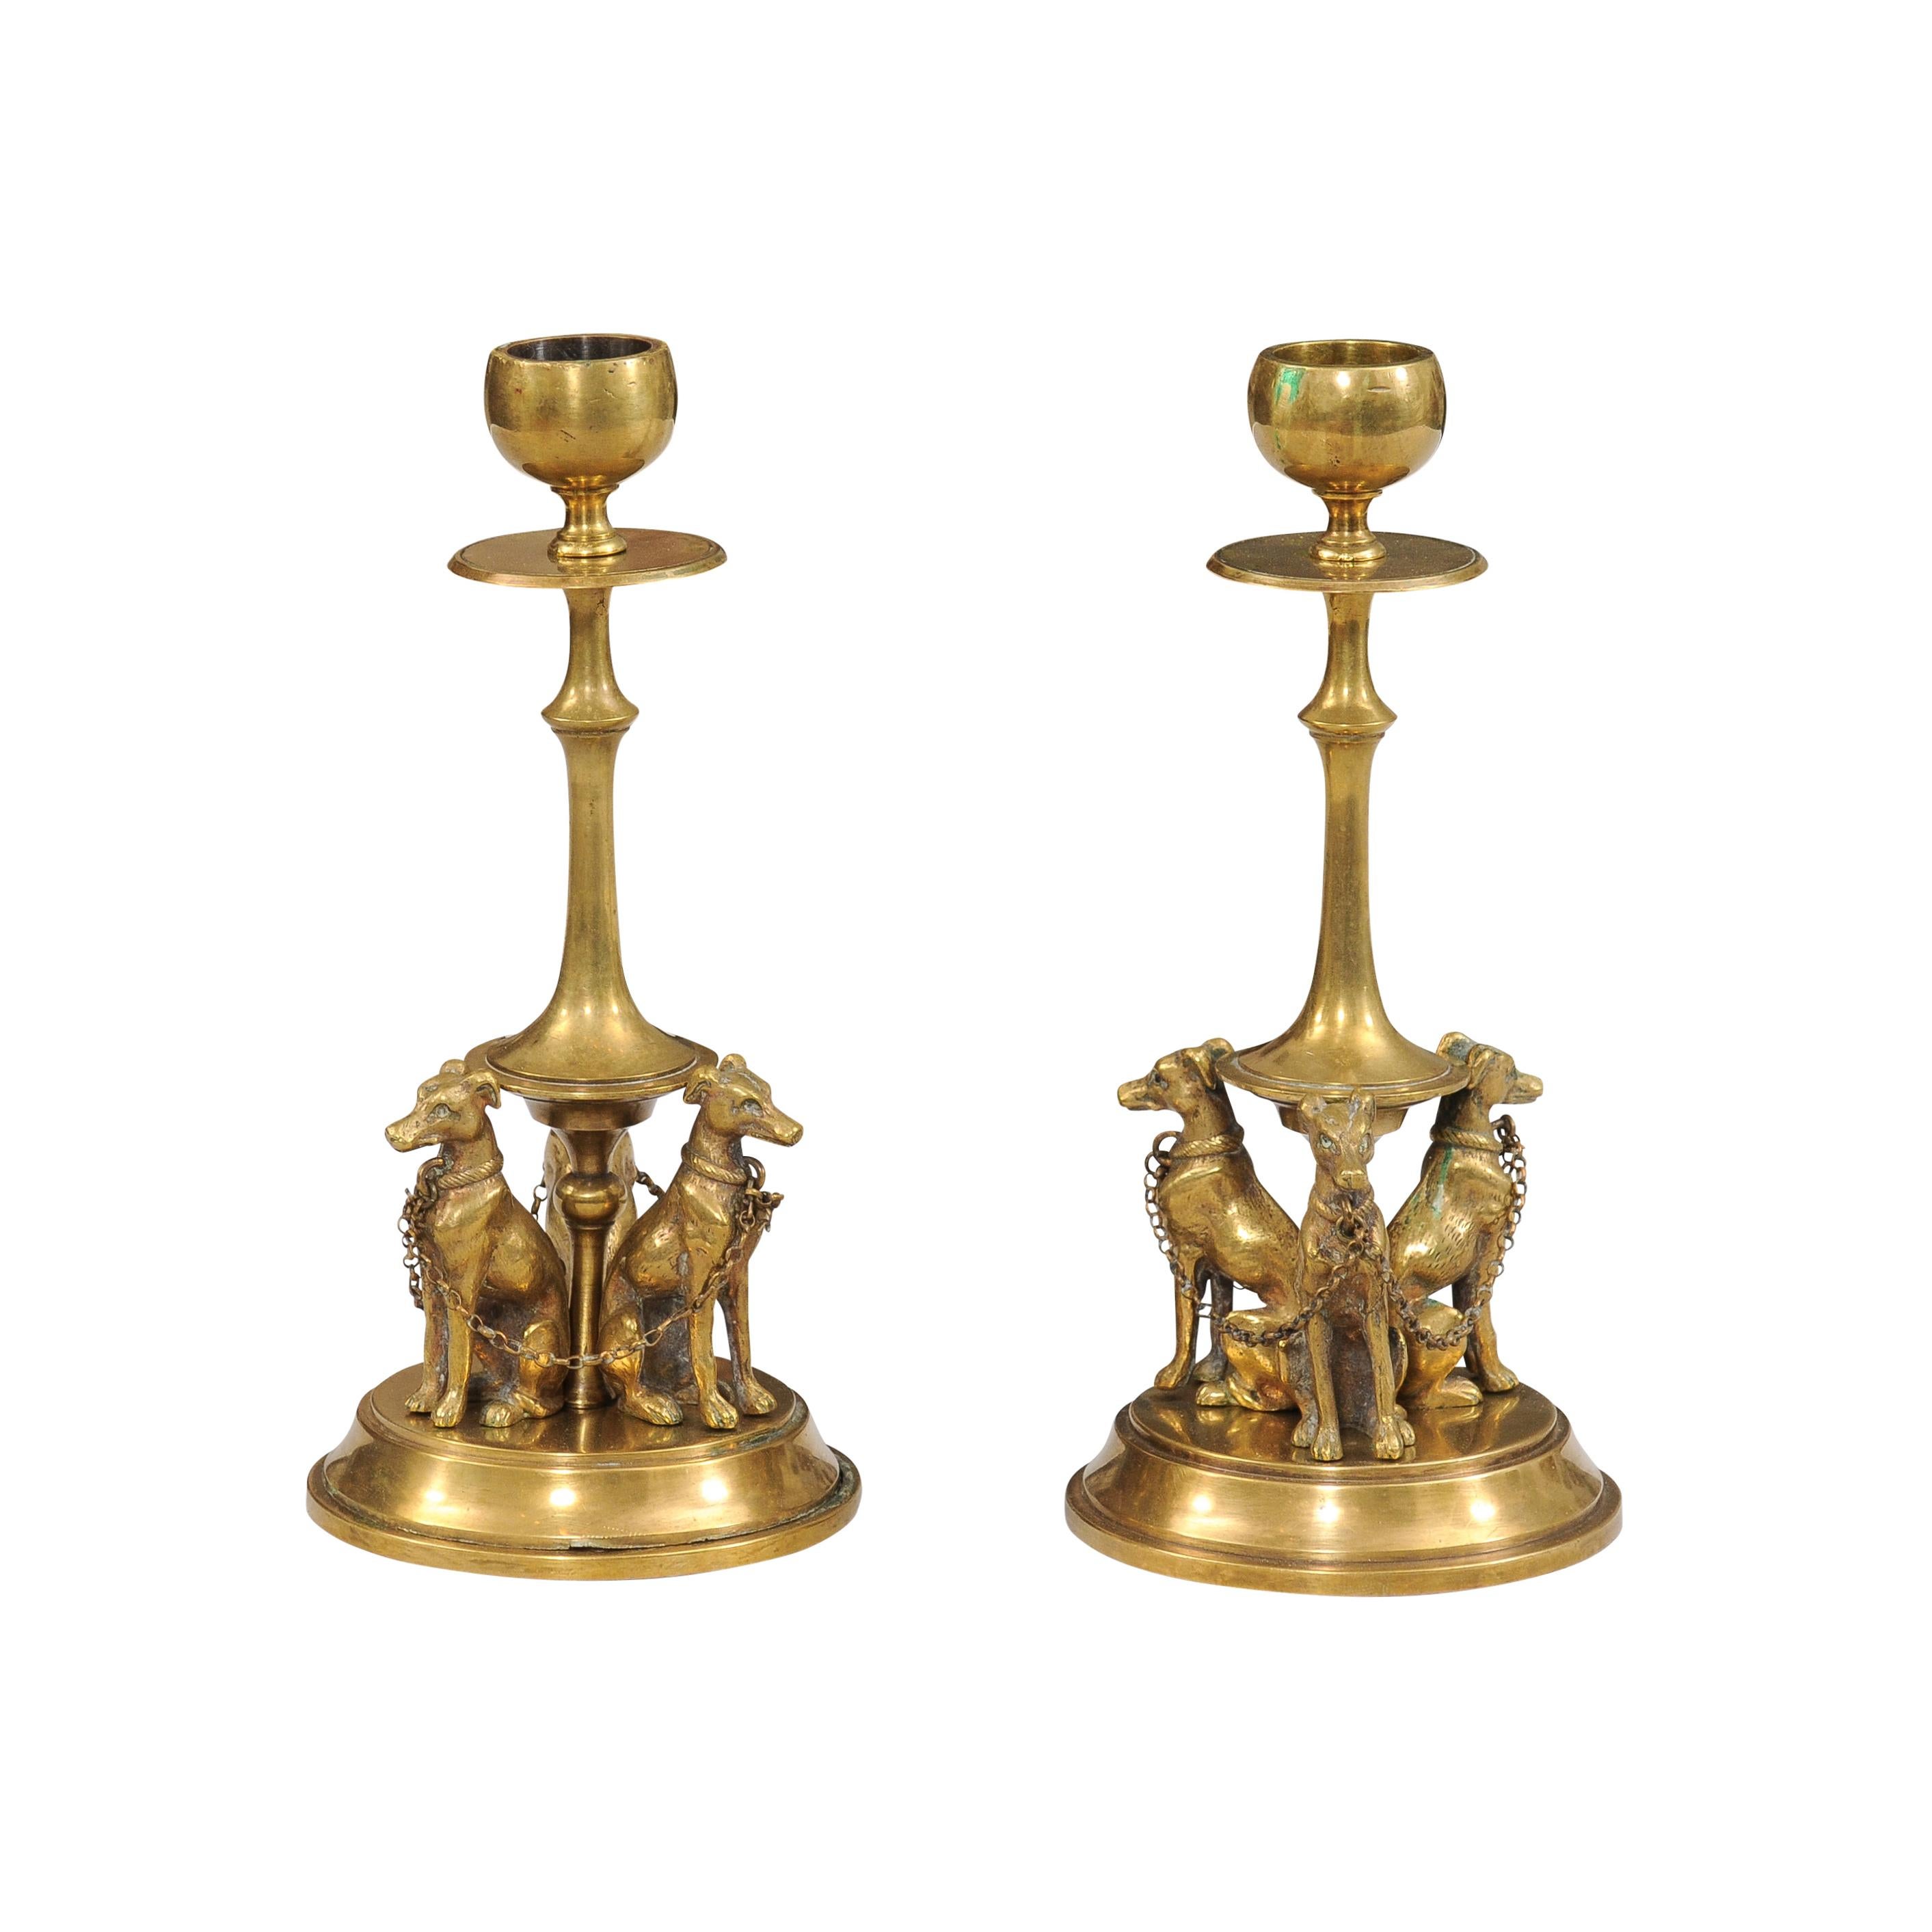 A pair of French bronze candlesticks from the 19th century each depicting three greyhound dogs in the lower section, connected to one another through chain links adjusted to their collar. Exuding opulence and impeccable craftsmanship, this pair of